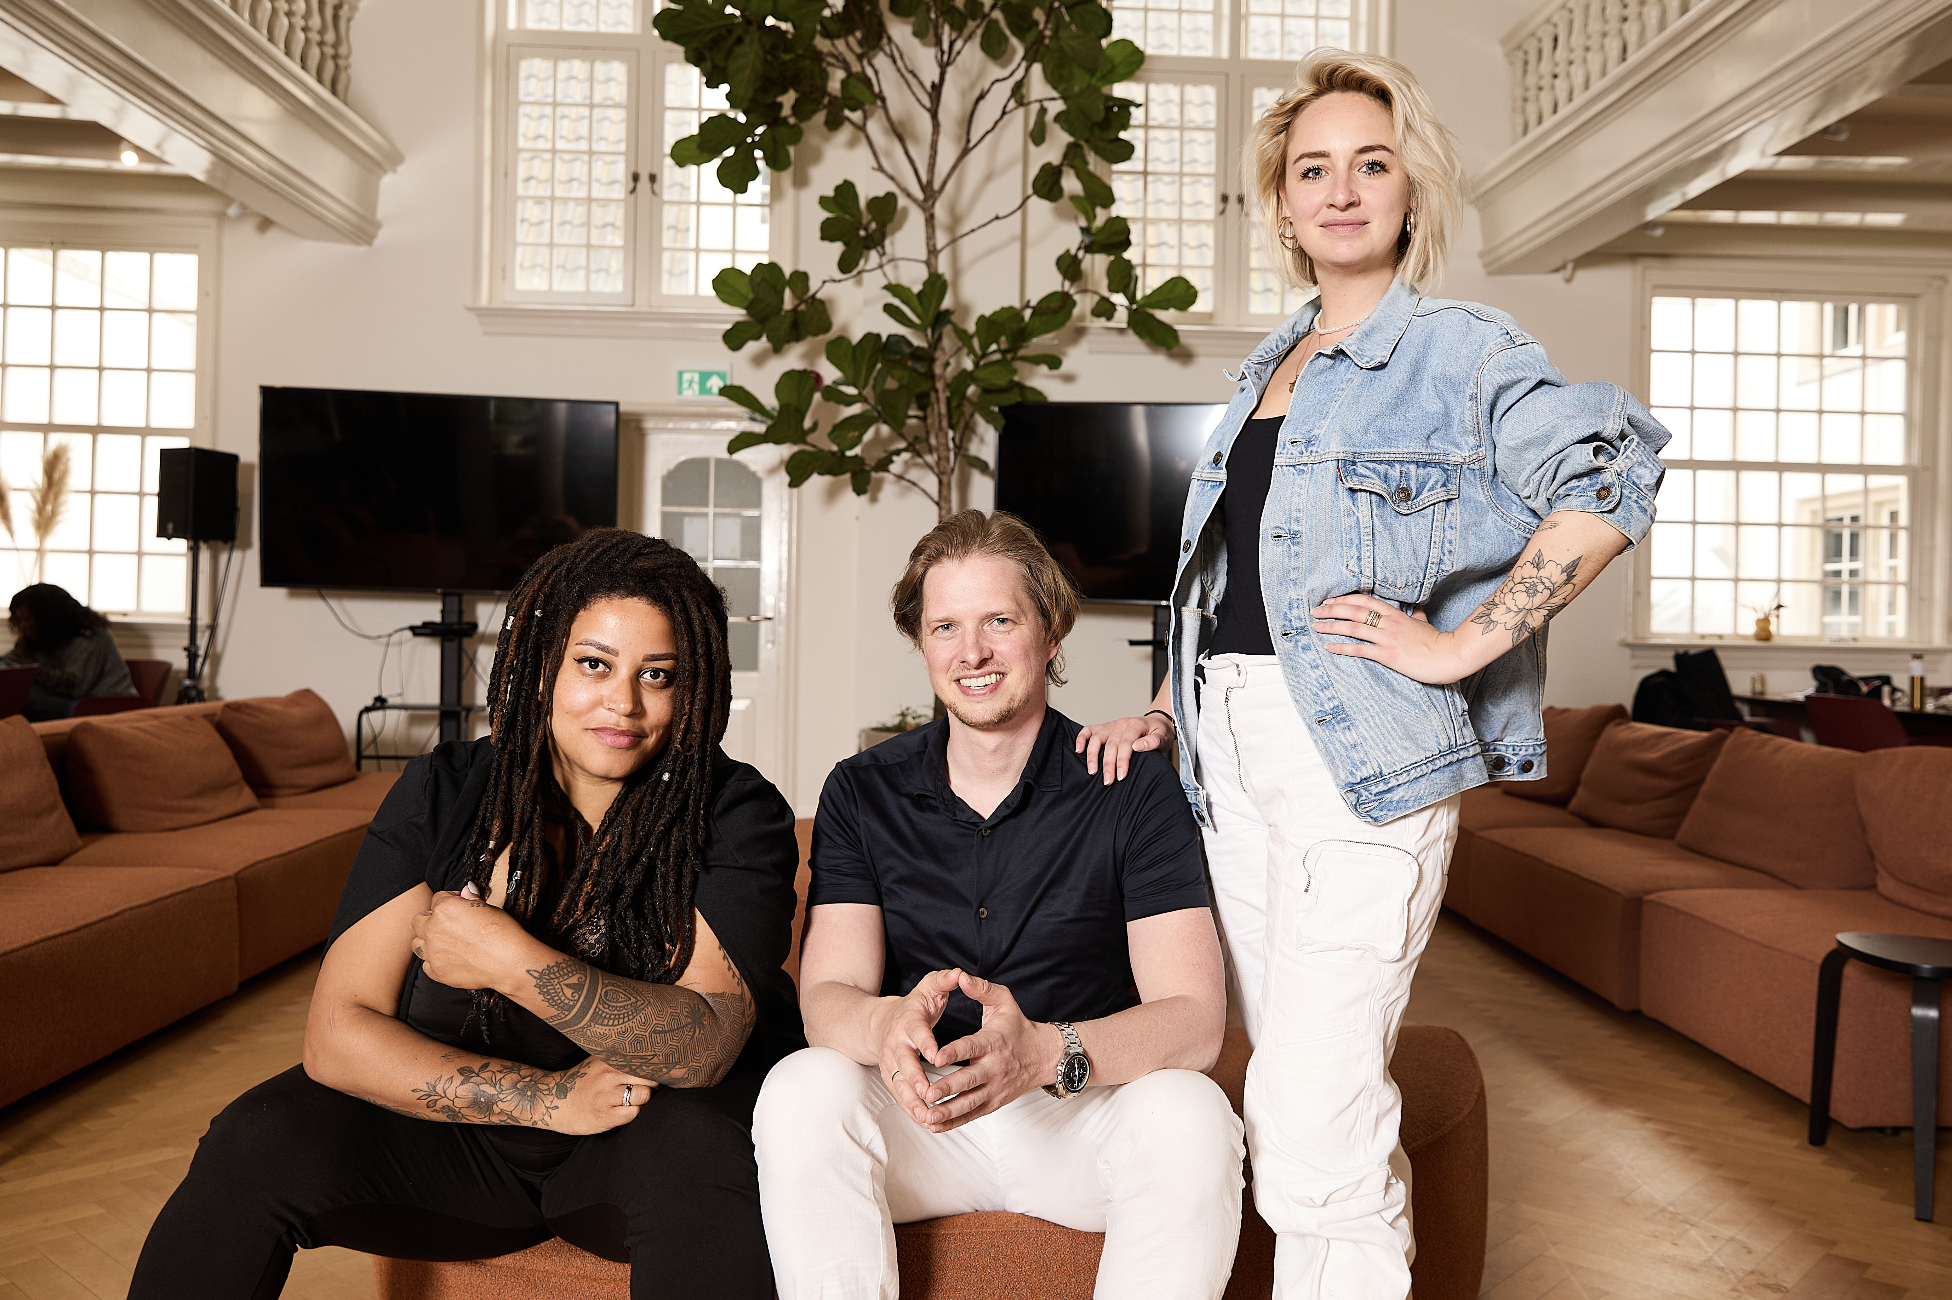  House of Inclusion haalt investeerder Wouter Glaser aan boord